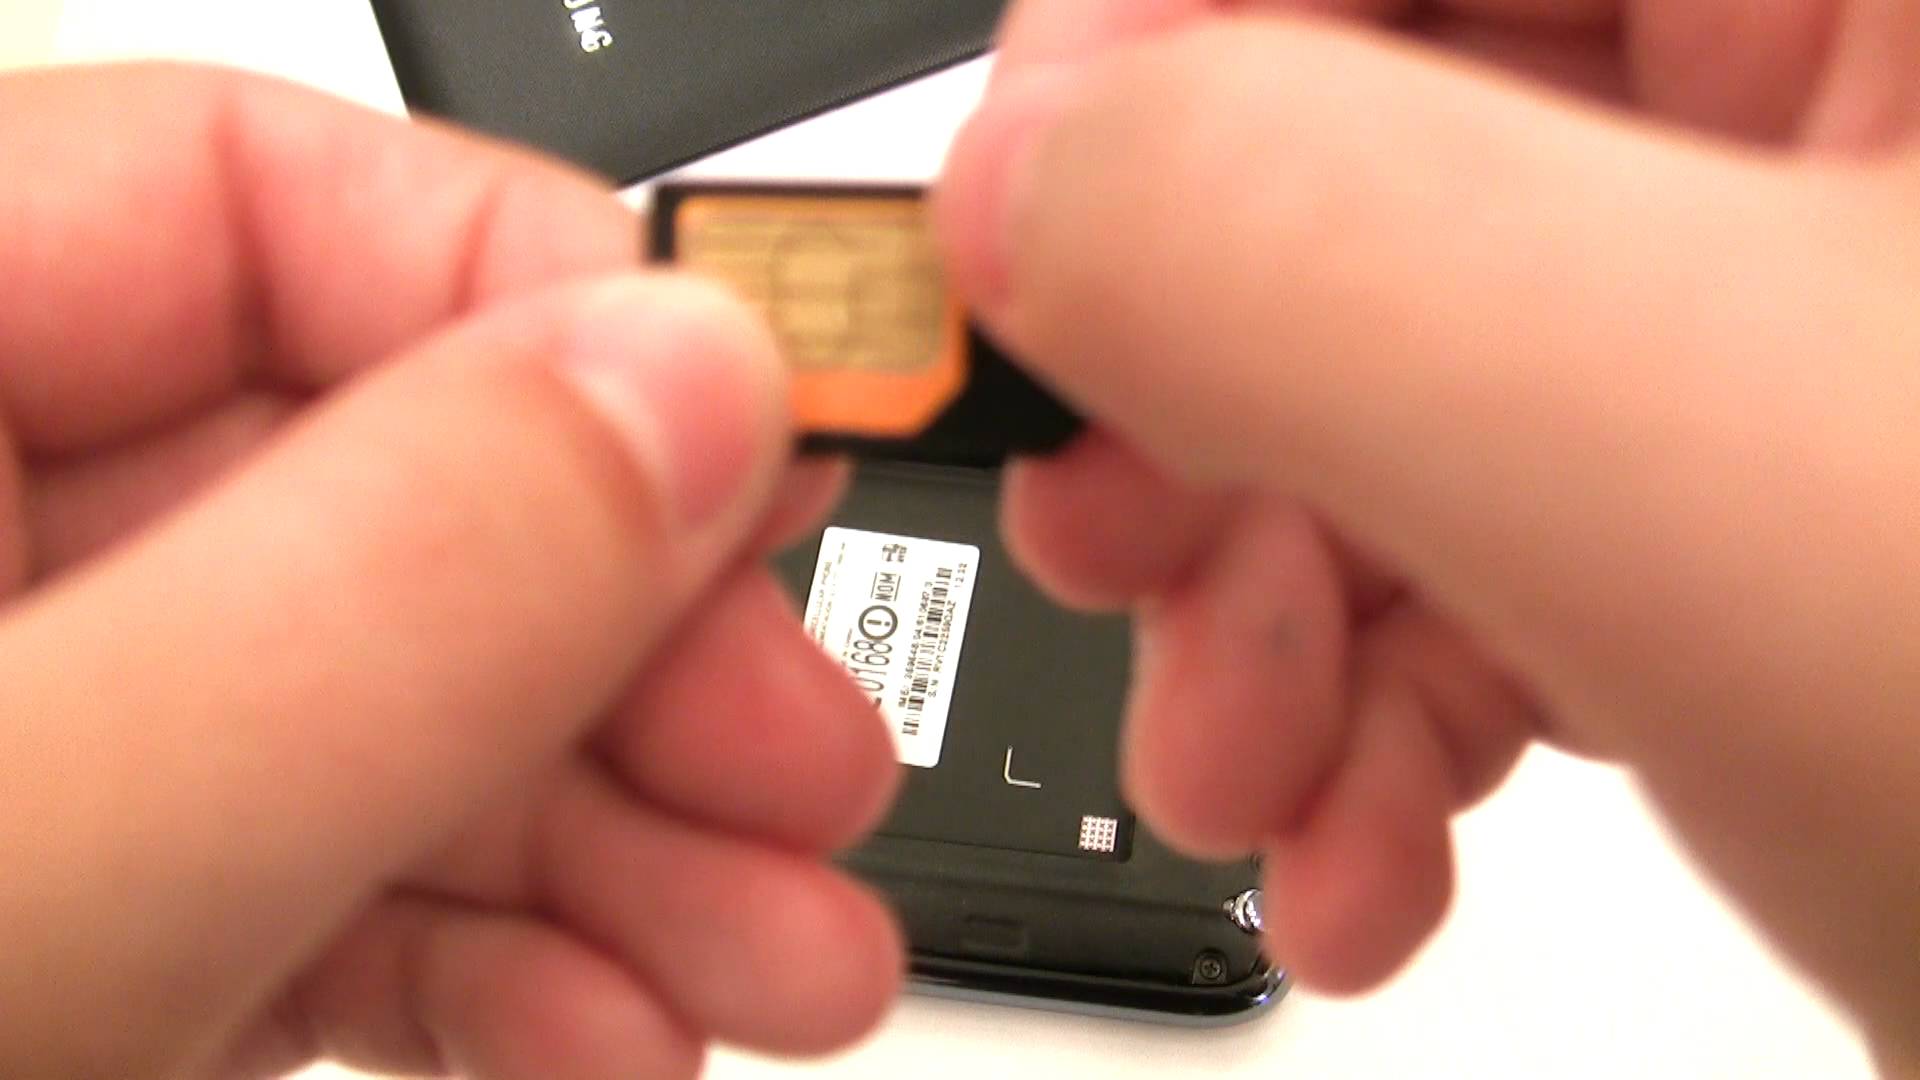 Micro Sim Adapter WITHOUT BREAKING Galaxy Note (or any other phone!)